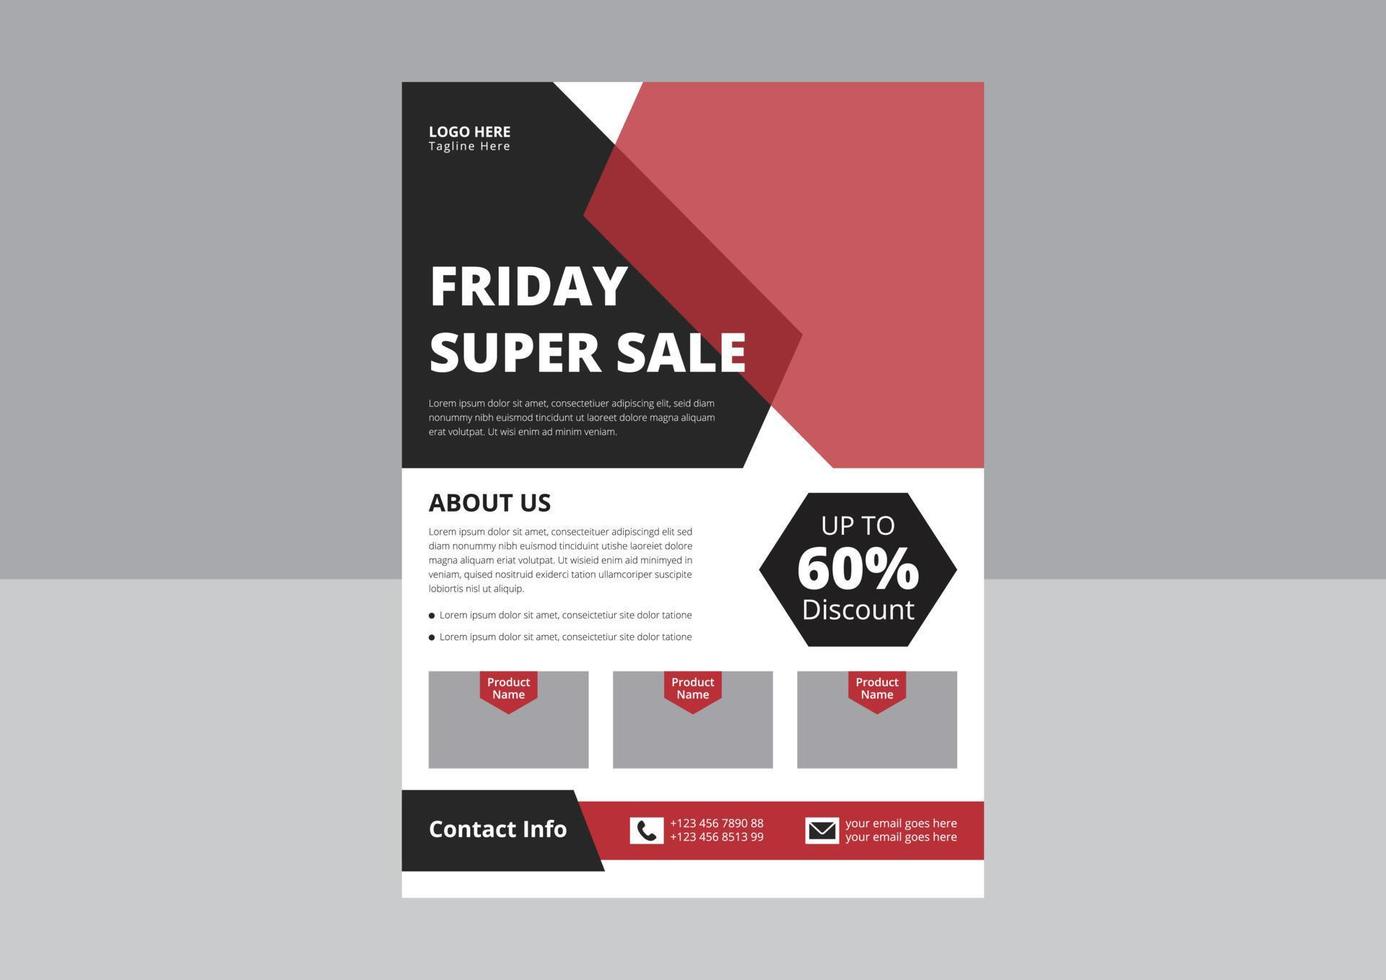 Friday Super Sale Flyer Template Design. Black Friday Sale Promotion with Sample Product. Black Friday Night Vacations flyer design. Cover, A4 paper size, Flyer design. vector